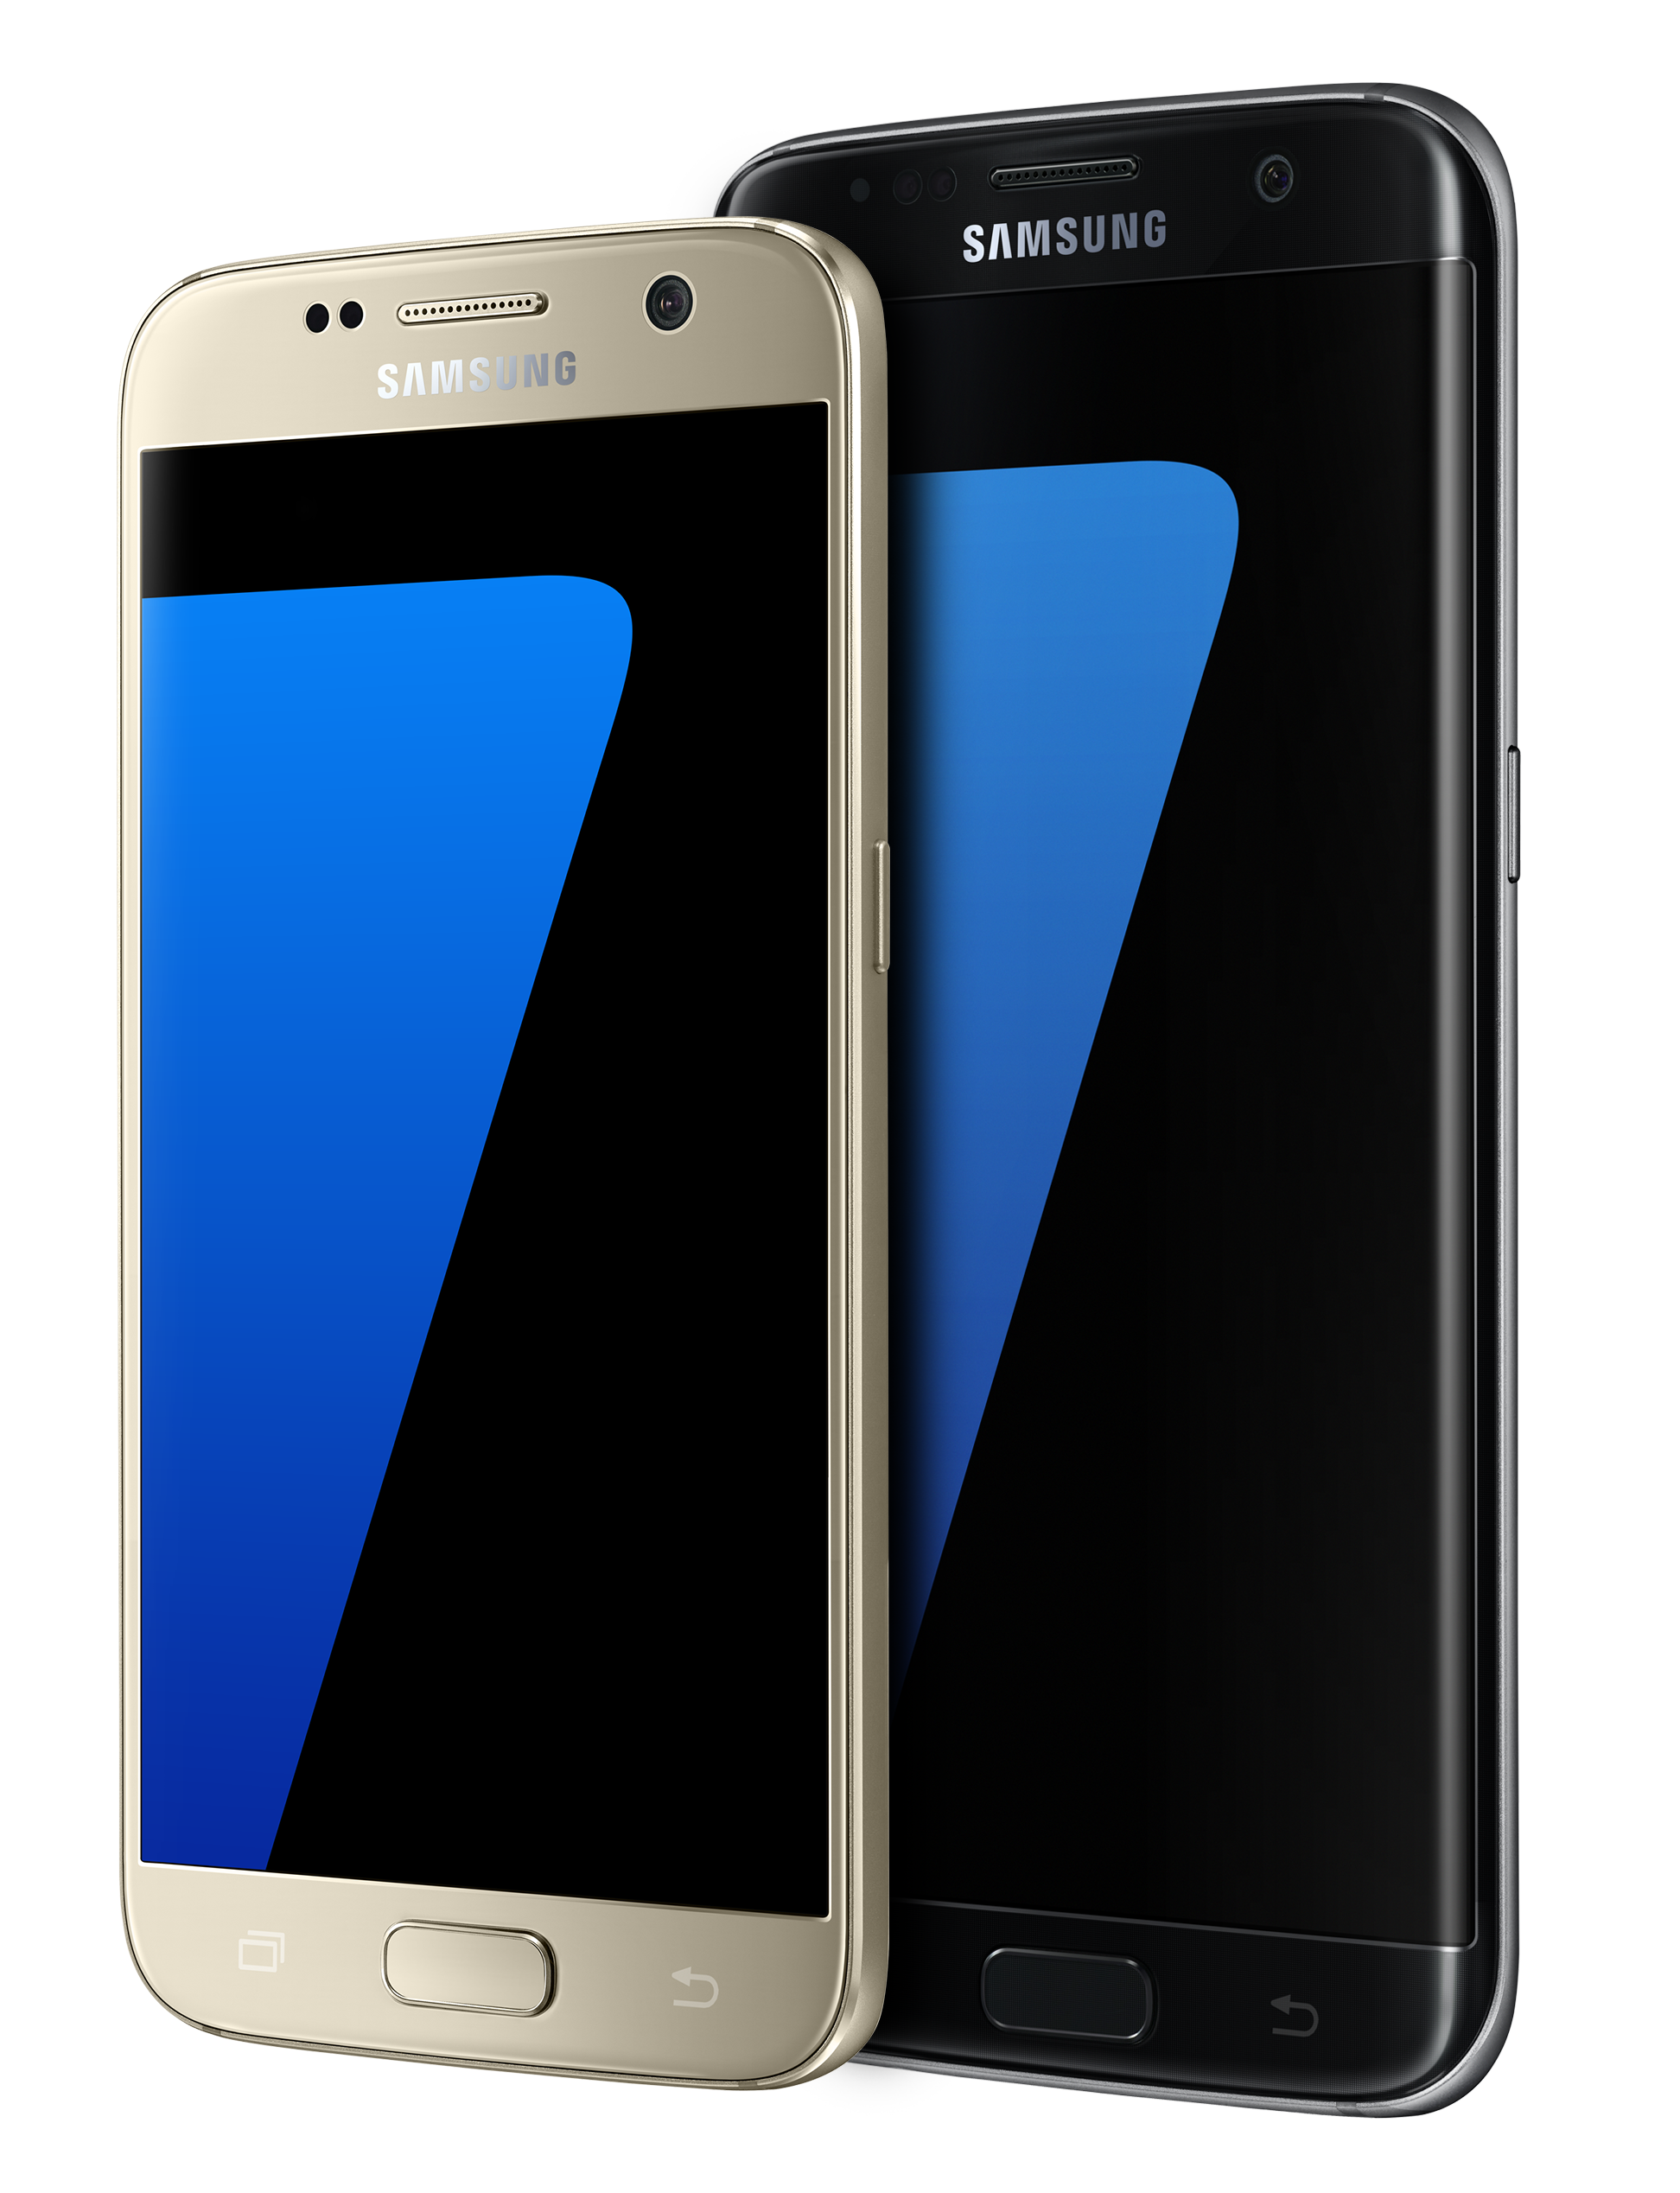 Samsung Galaxy S7 specs, features, price, release date, and more (2022)